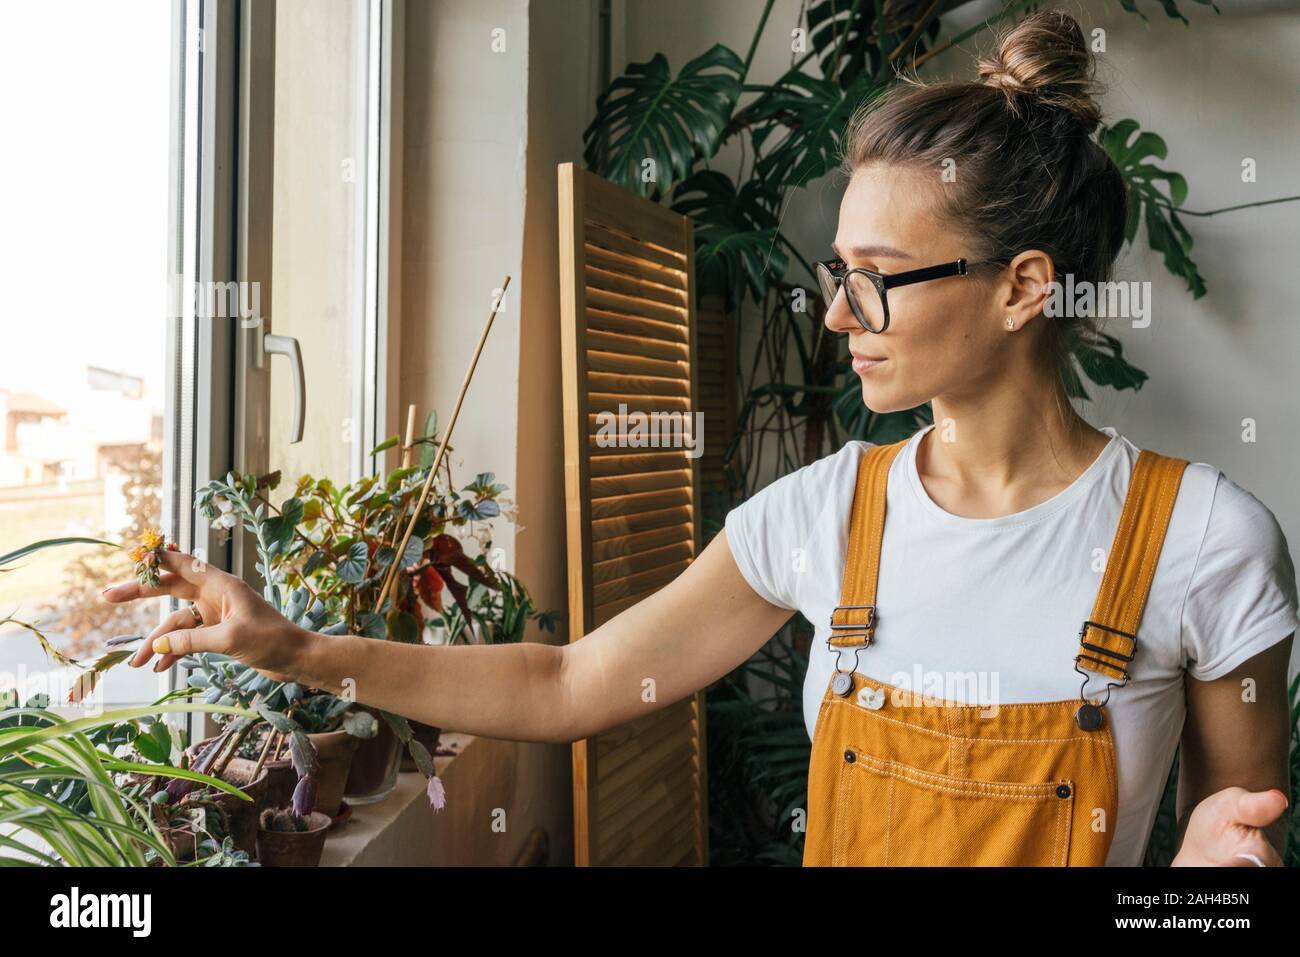 Young woman caring for plants on window sill Stock Photo